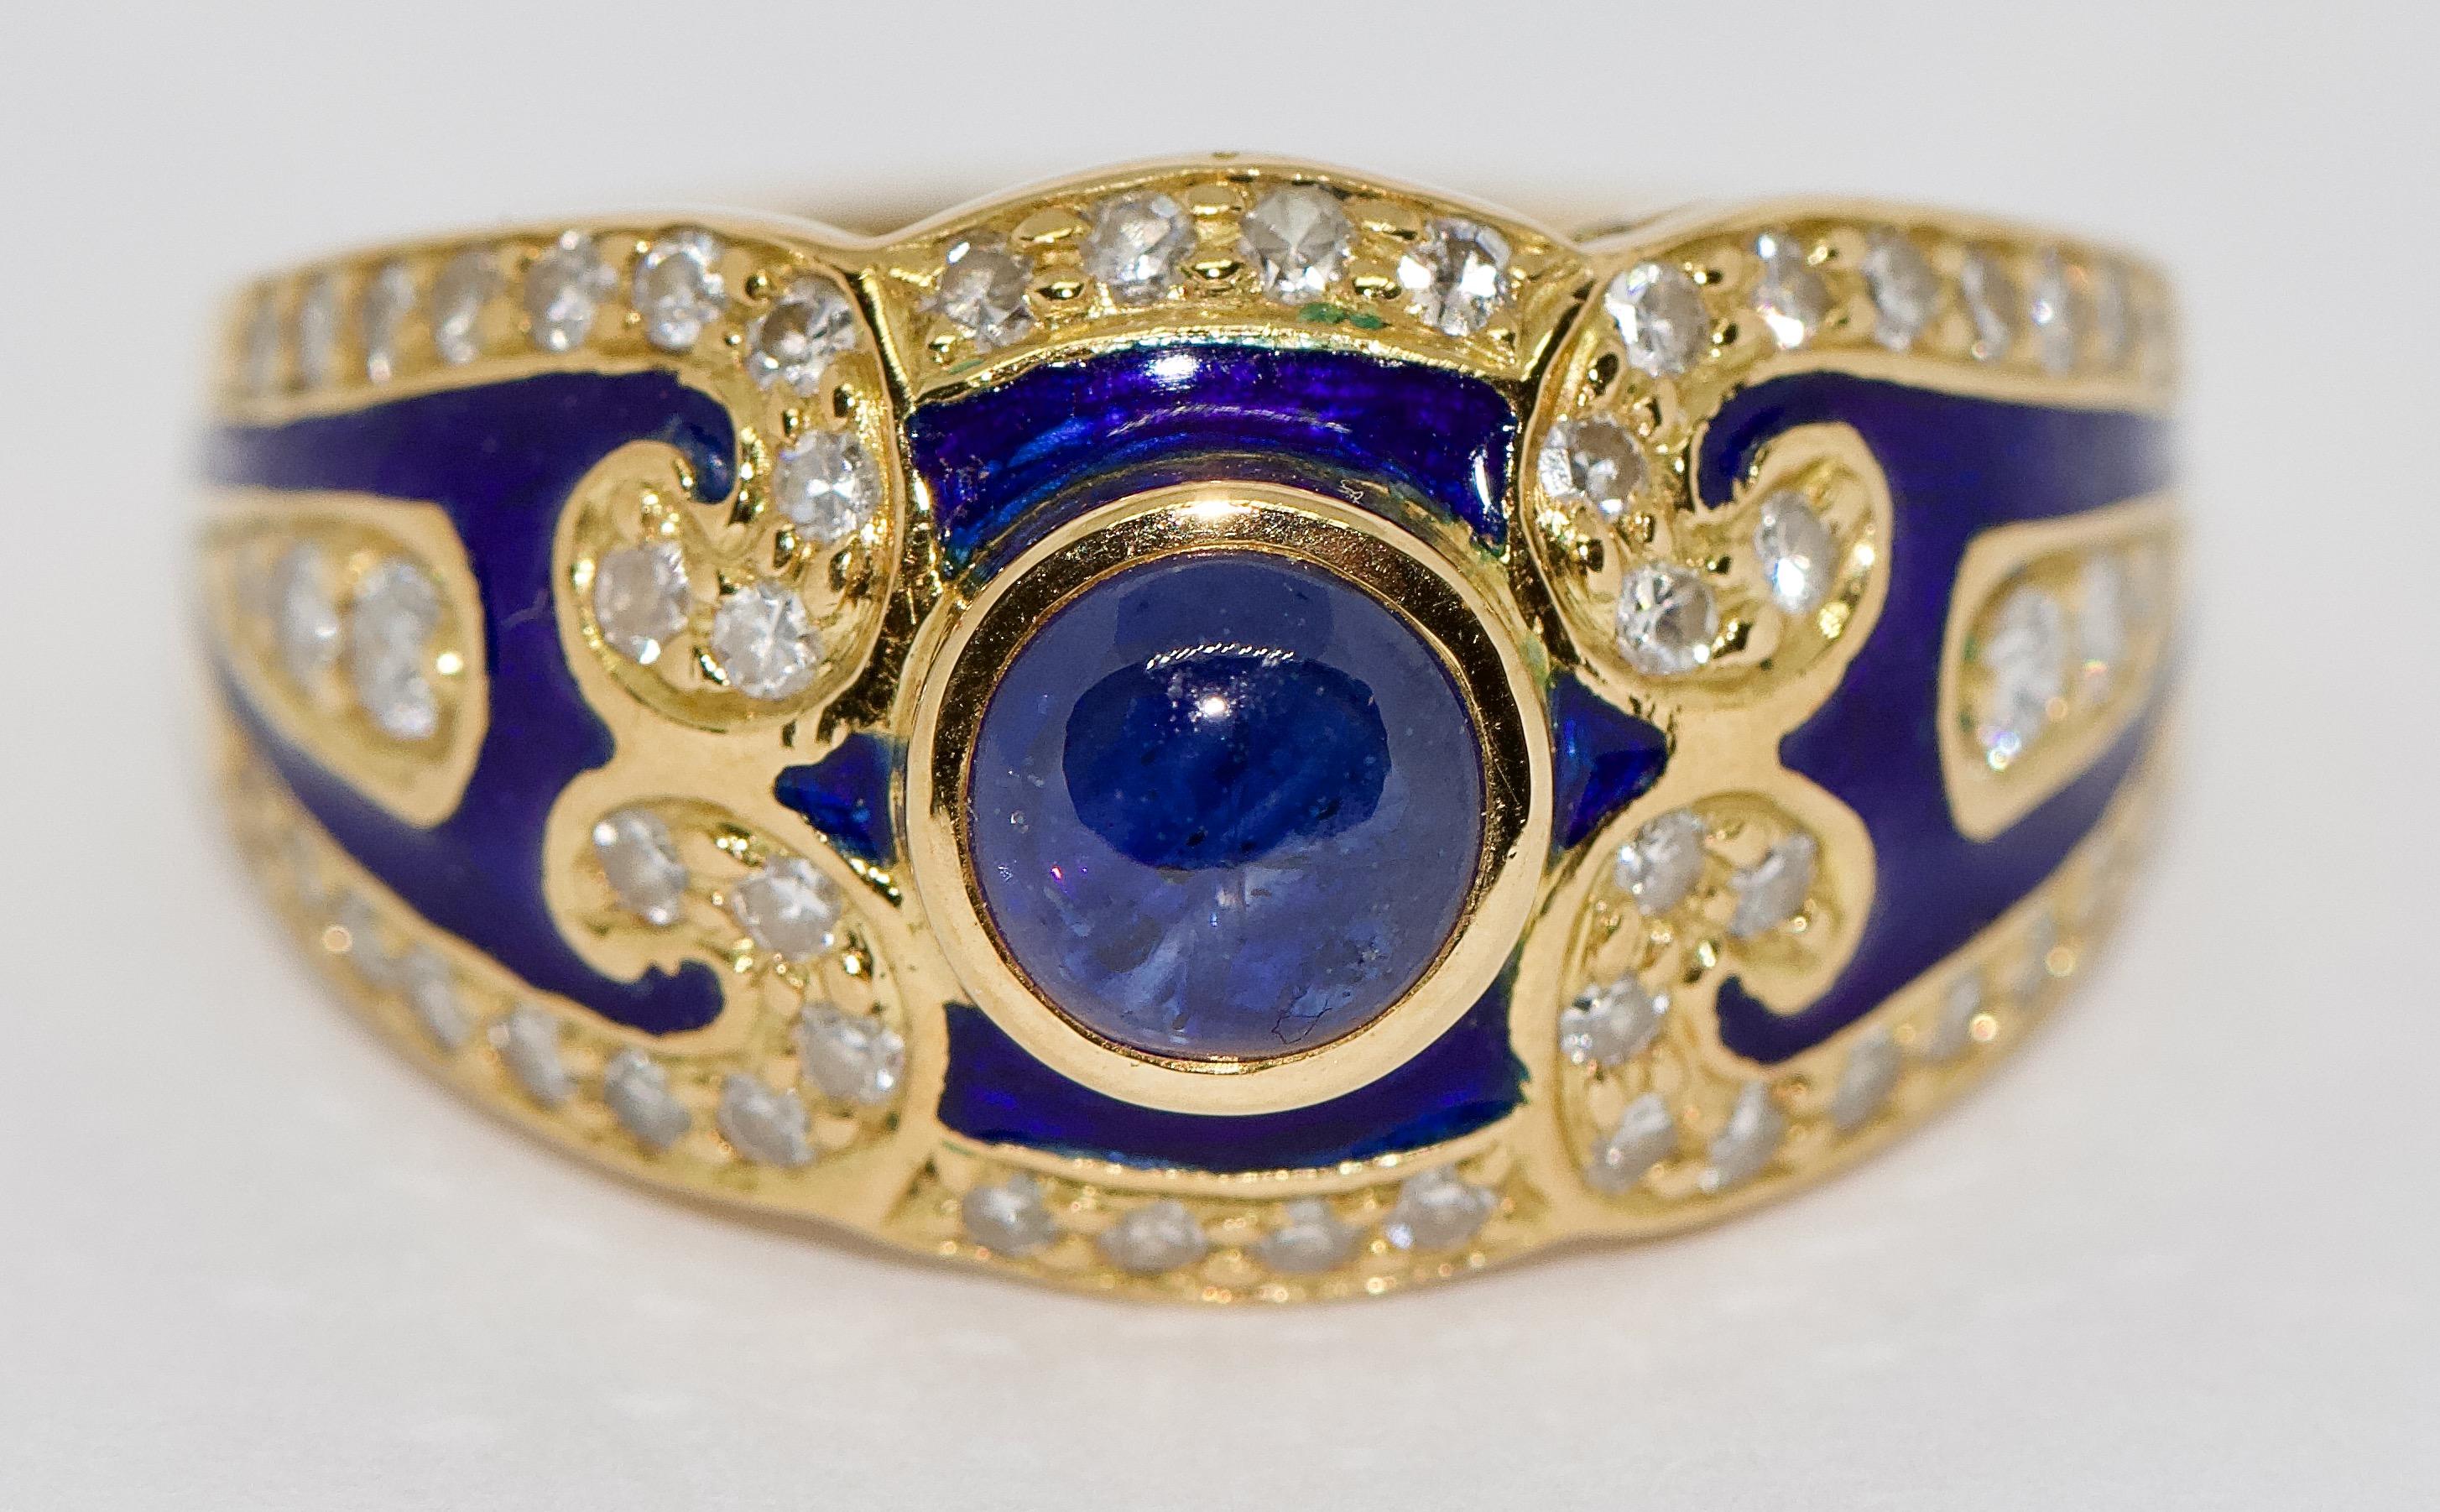 Fine ladies ring, 18 Karat gold with enamel, sapphire and diamonds.

Including certificate of authenticity.

US ring size 6
On request we can adjust the ring size expertly.